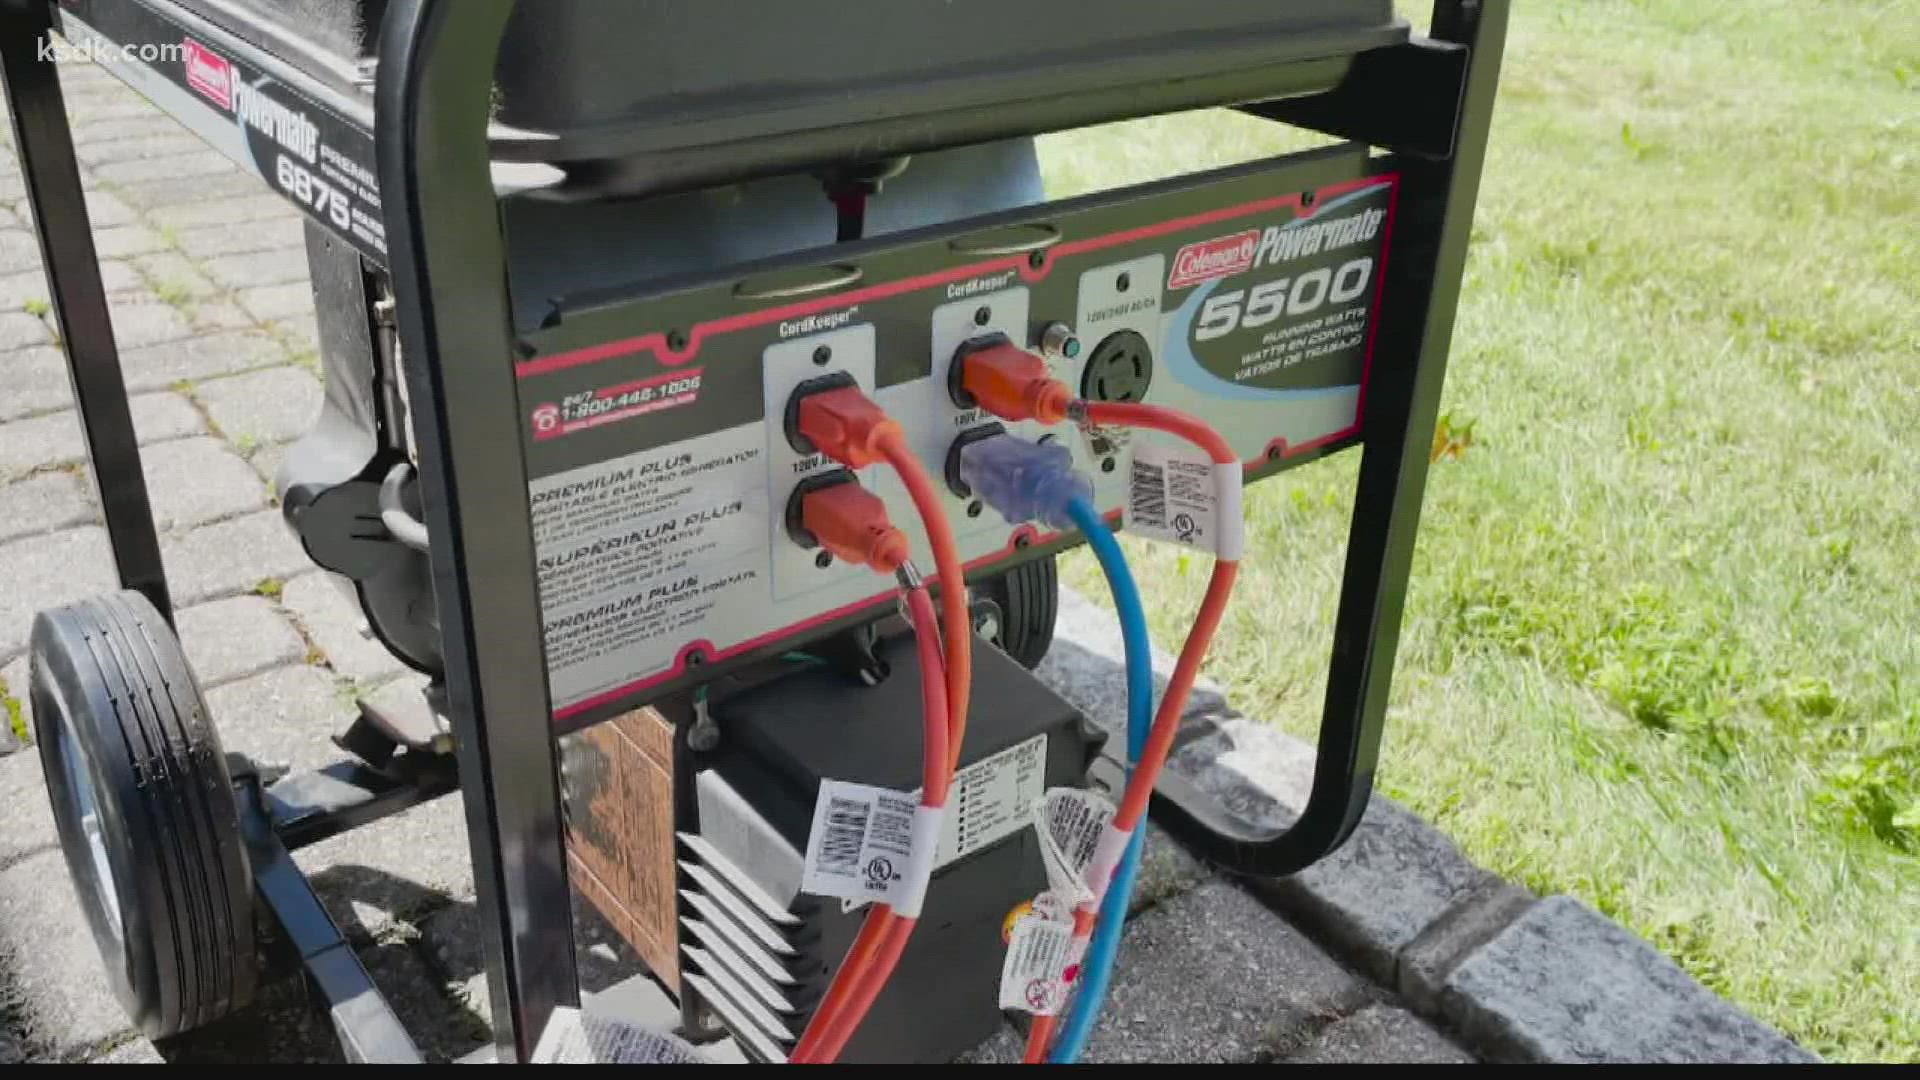 With winter right around the corner, it might be a good time to look at your generator options